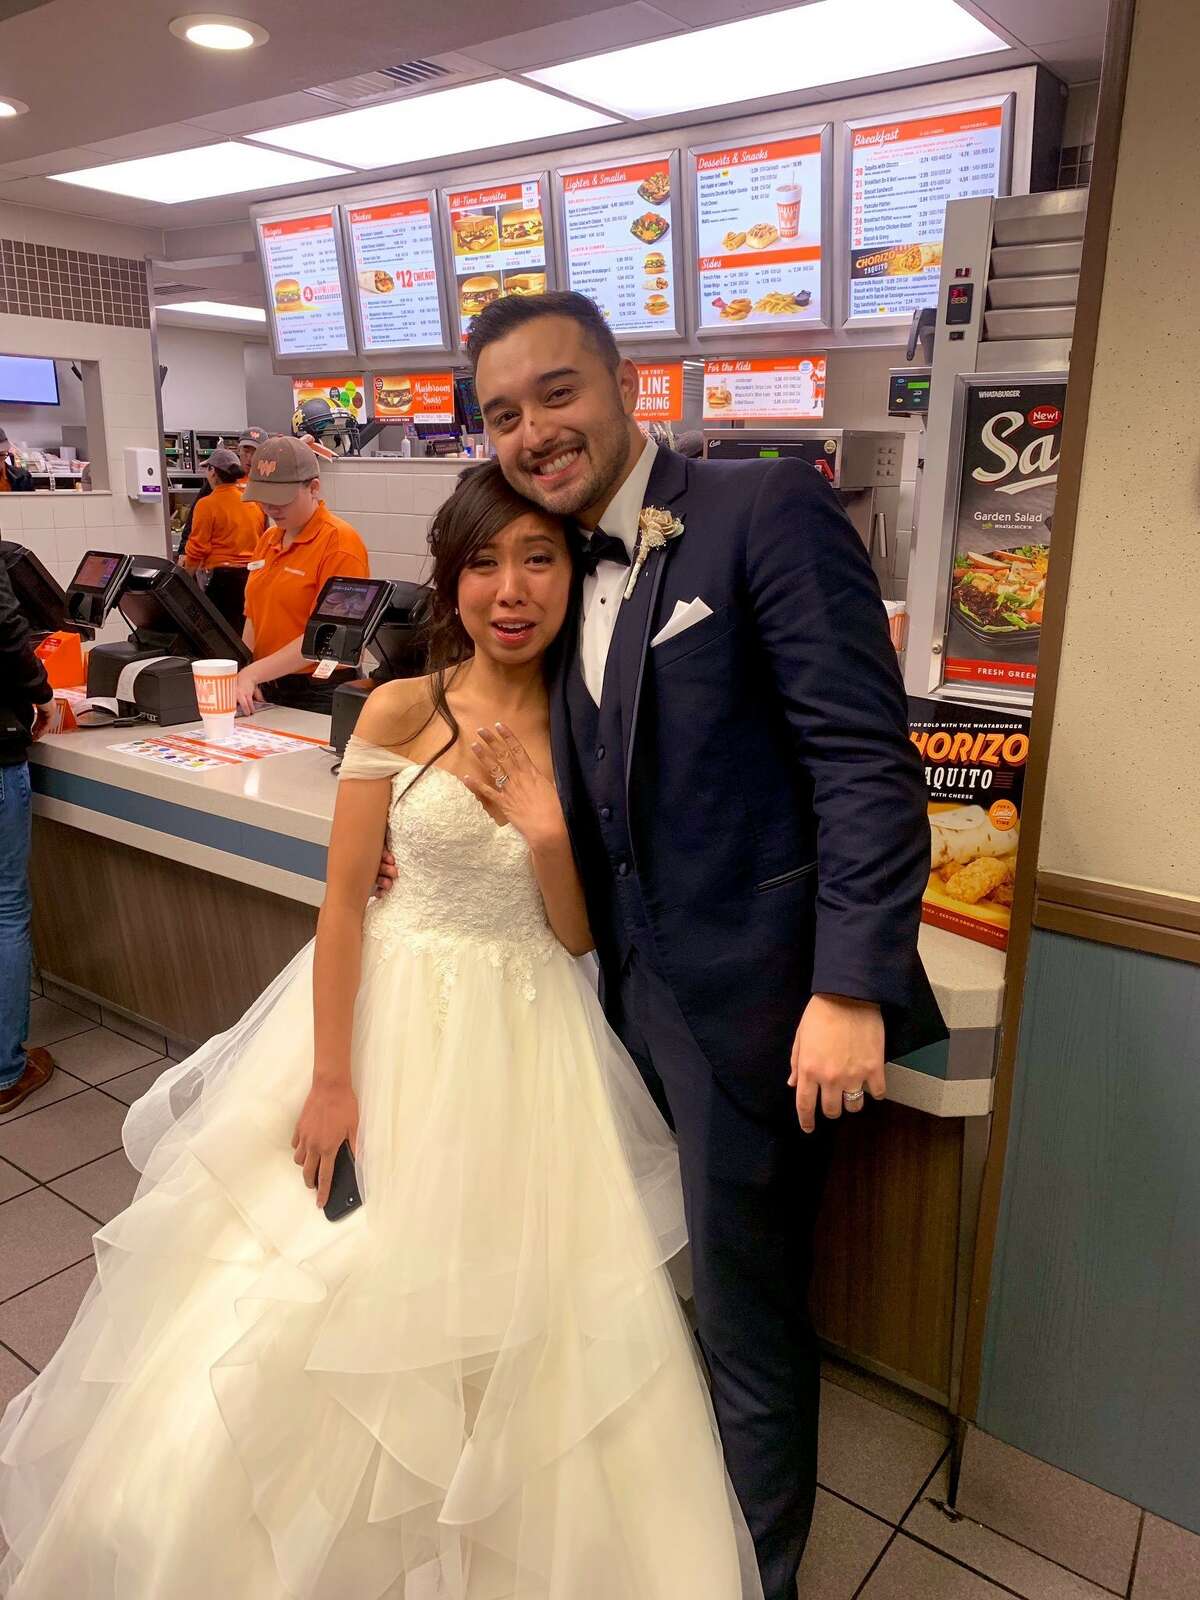 Jordan and Arianne Moore had a traditional church wedding on January 11, 2019. After walking down the aisle, they decided to do it again - inside a Whataburger.